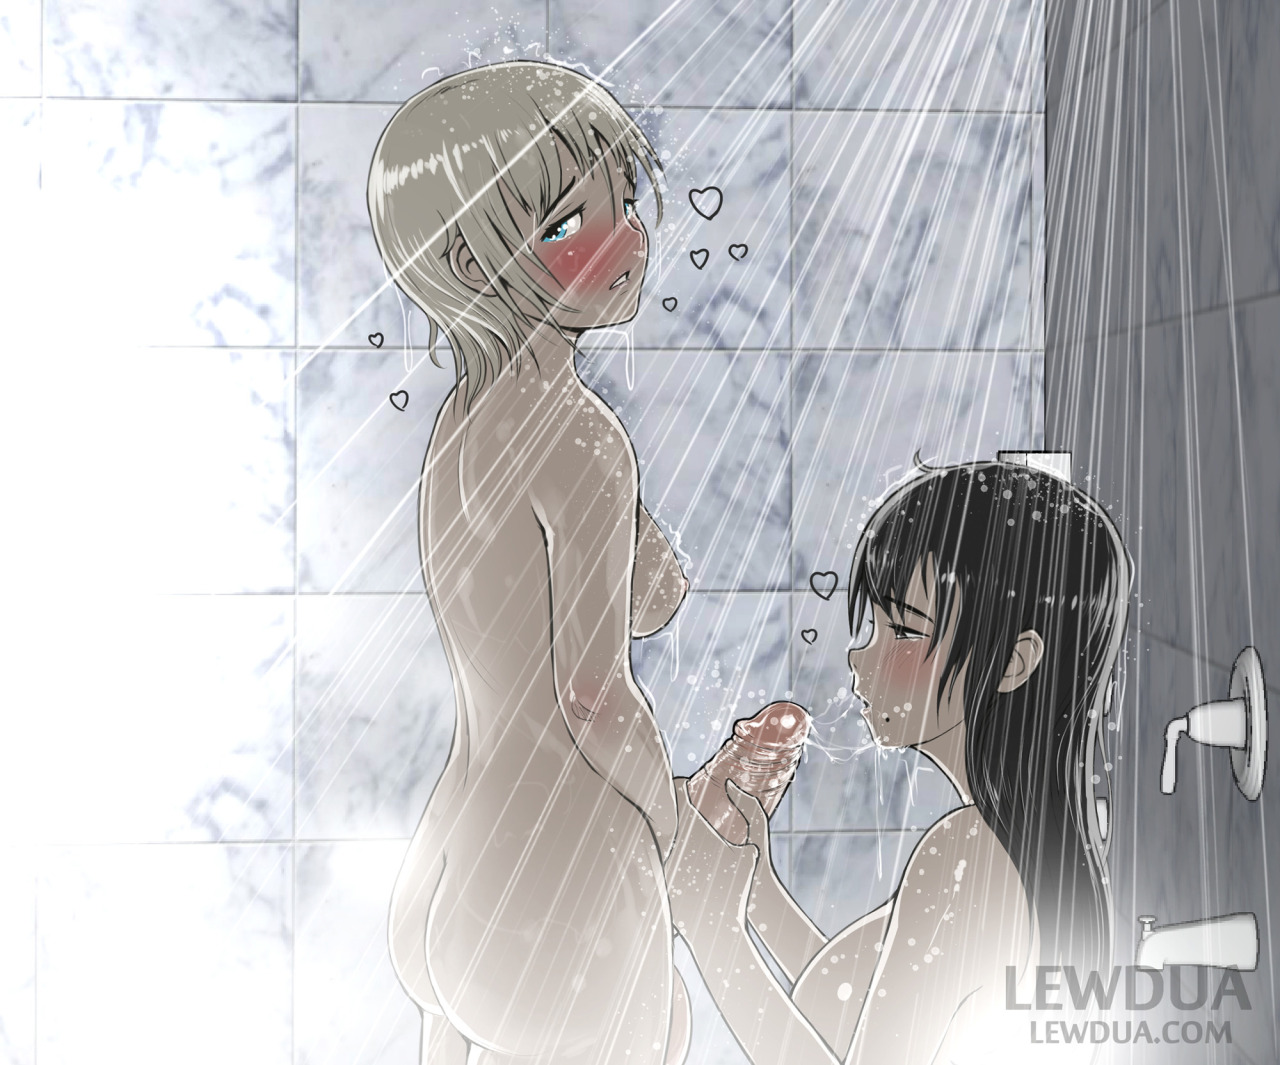 Shower show - Nessie and Alison